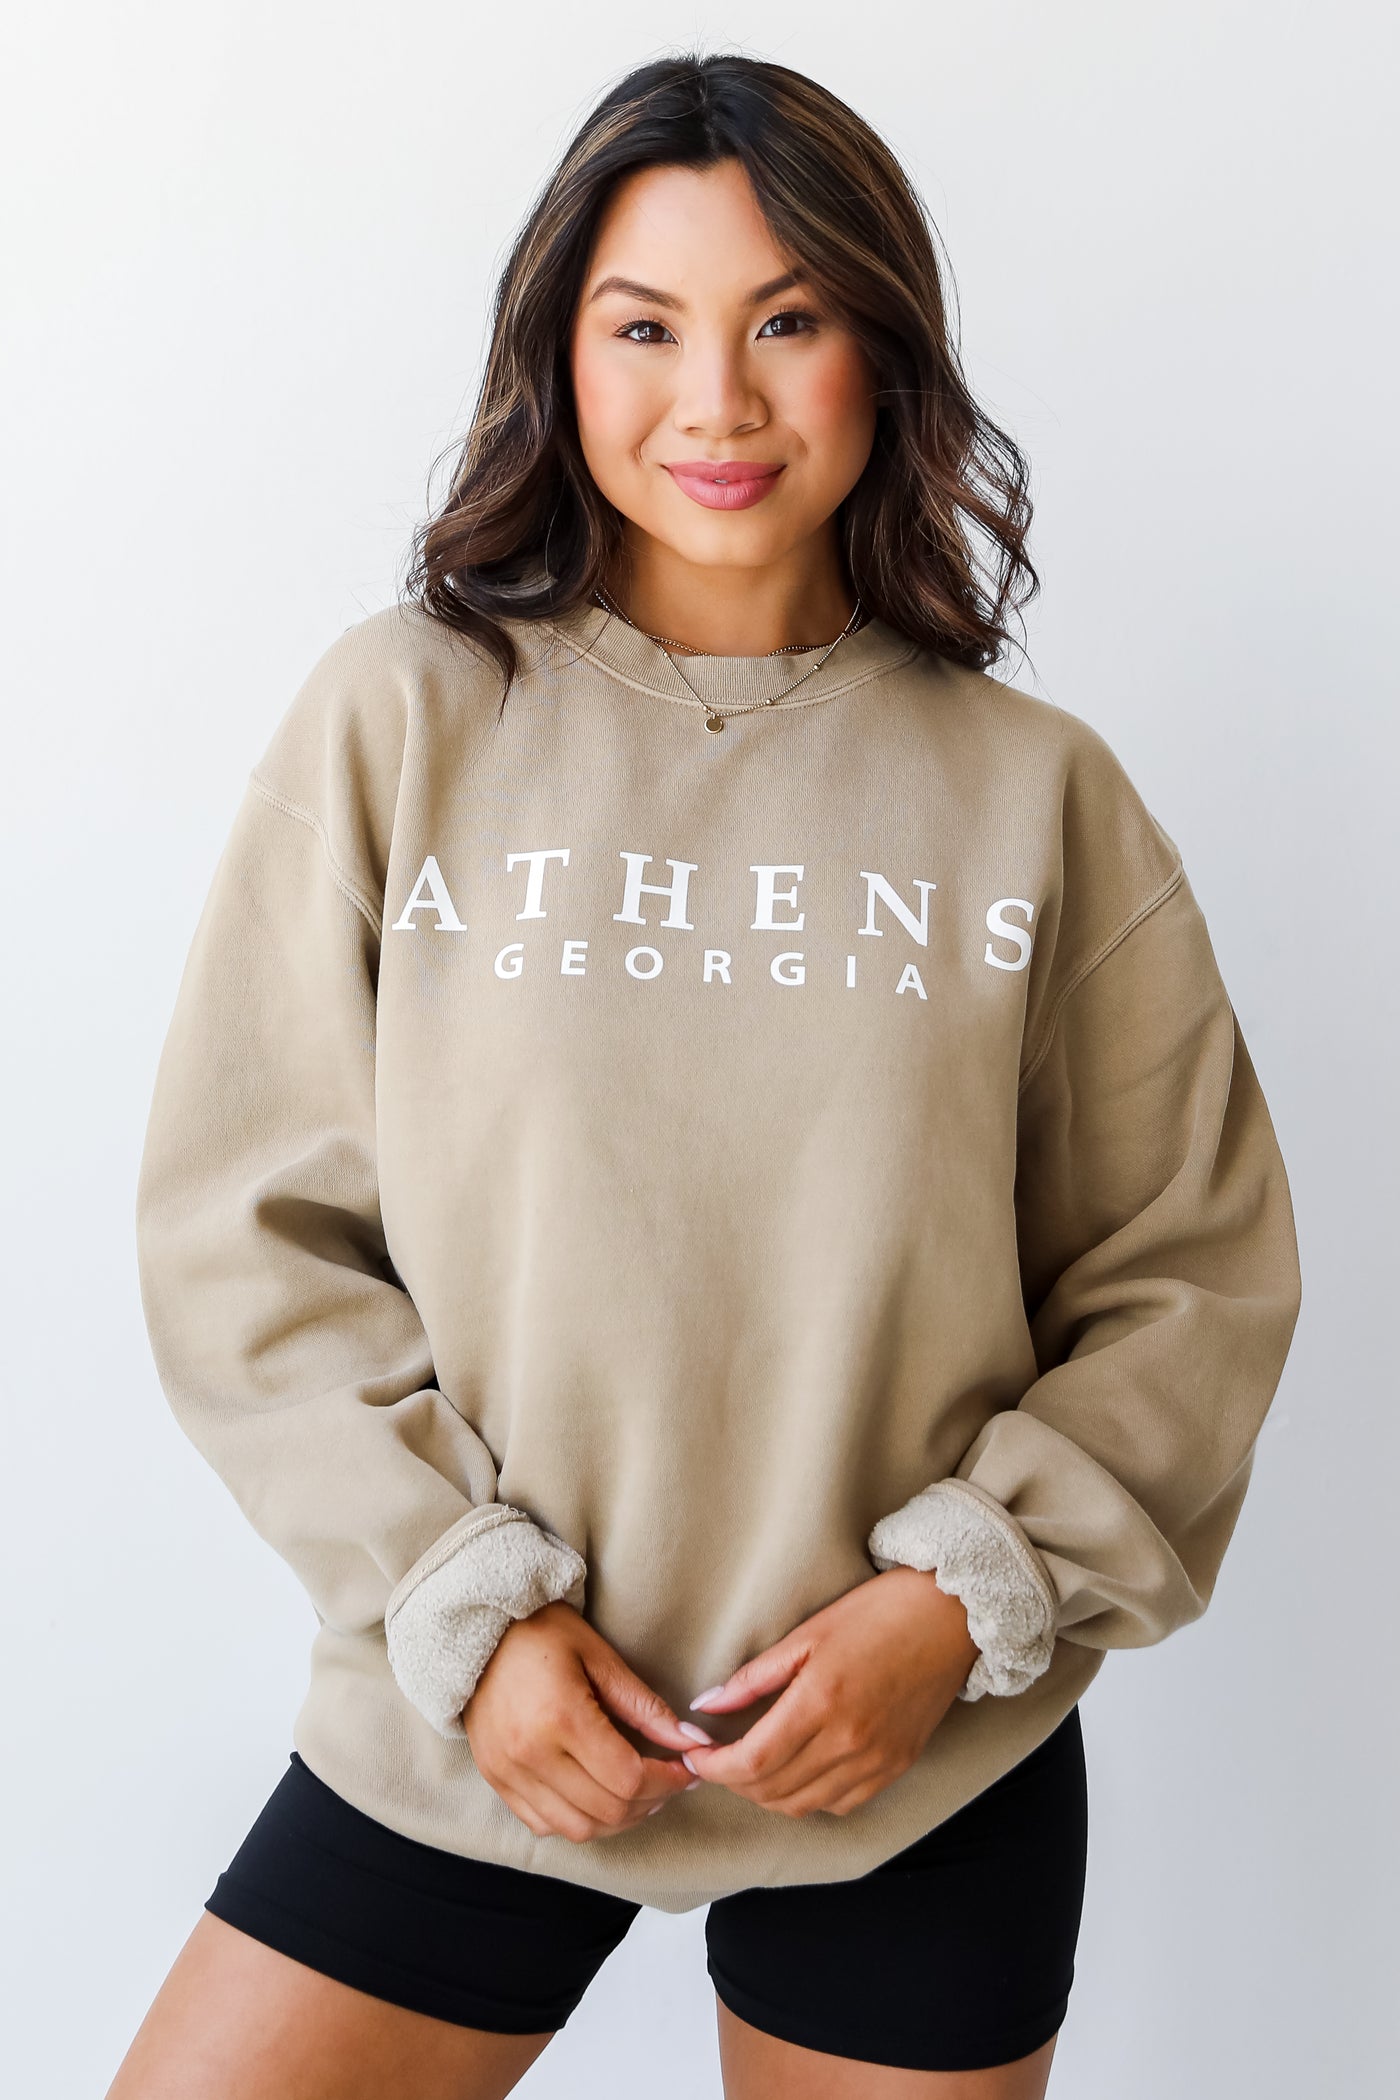 Tan Athens Georgia Pullover front view